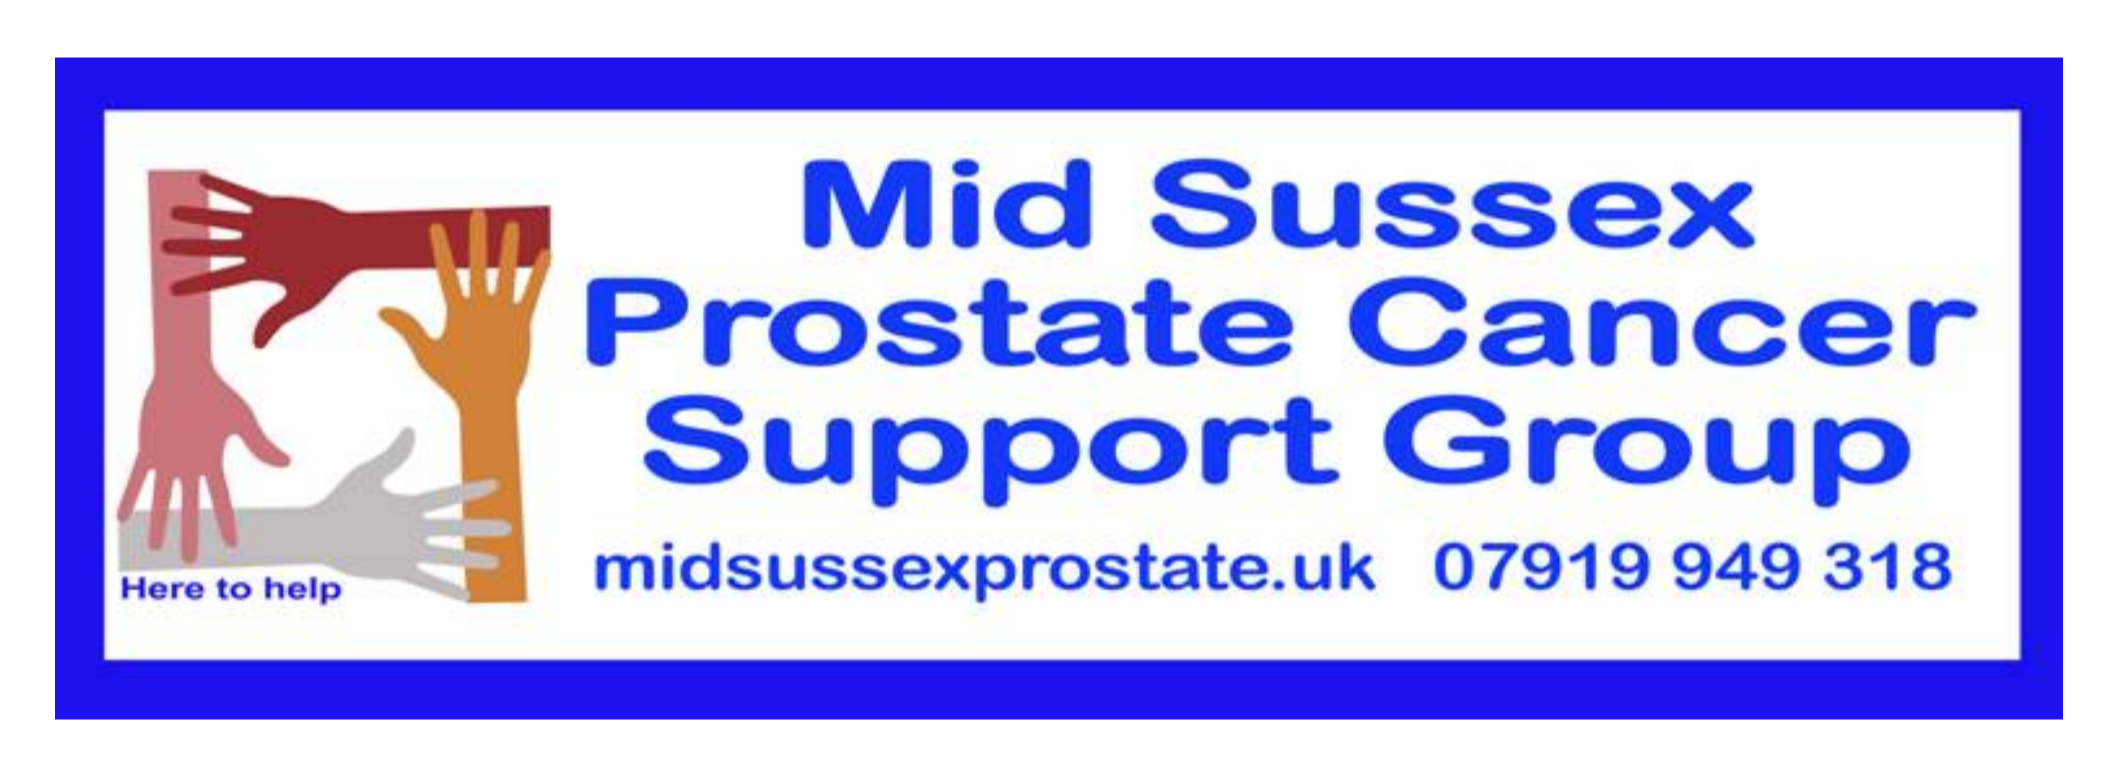 Mid Sussex Prostate Cancer Support Group midsussexprostate.uk 07919 949318